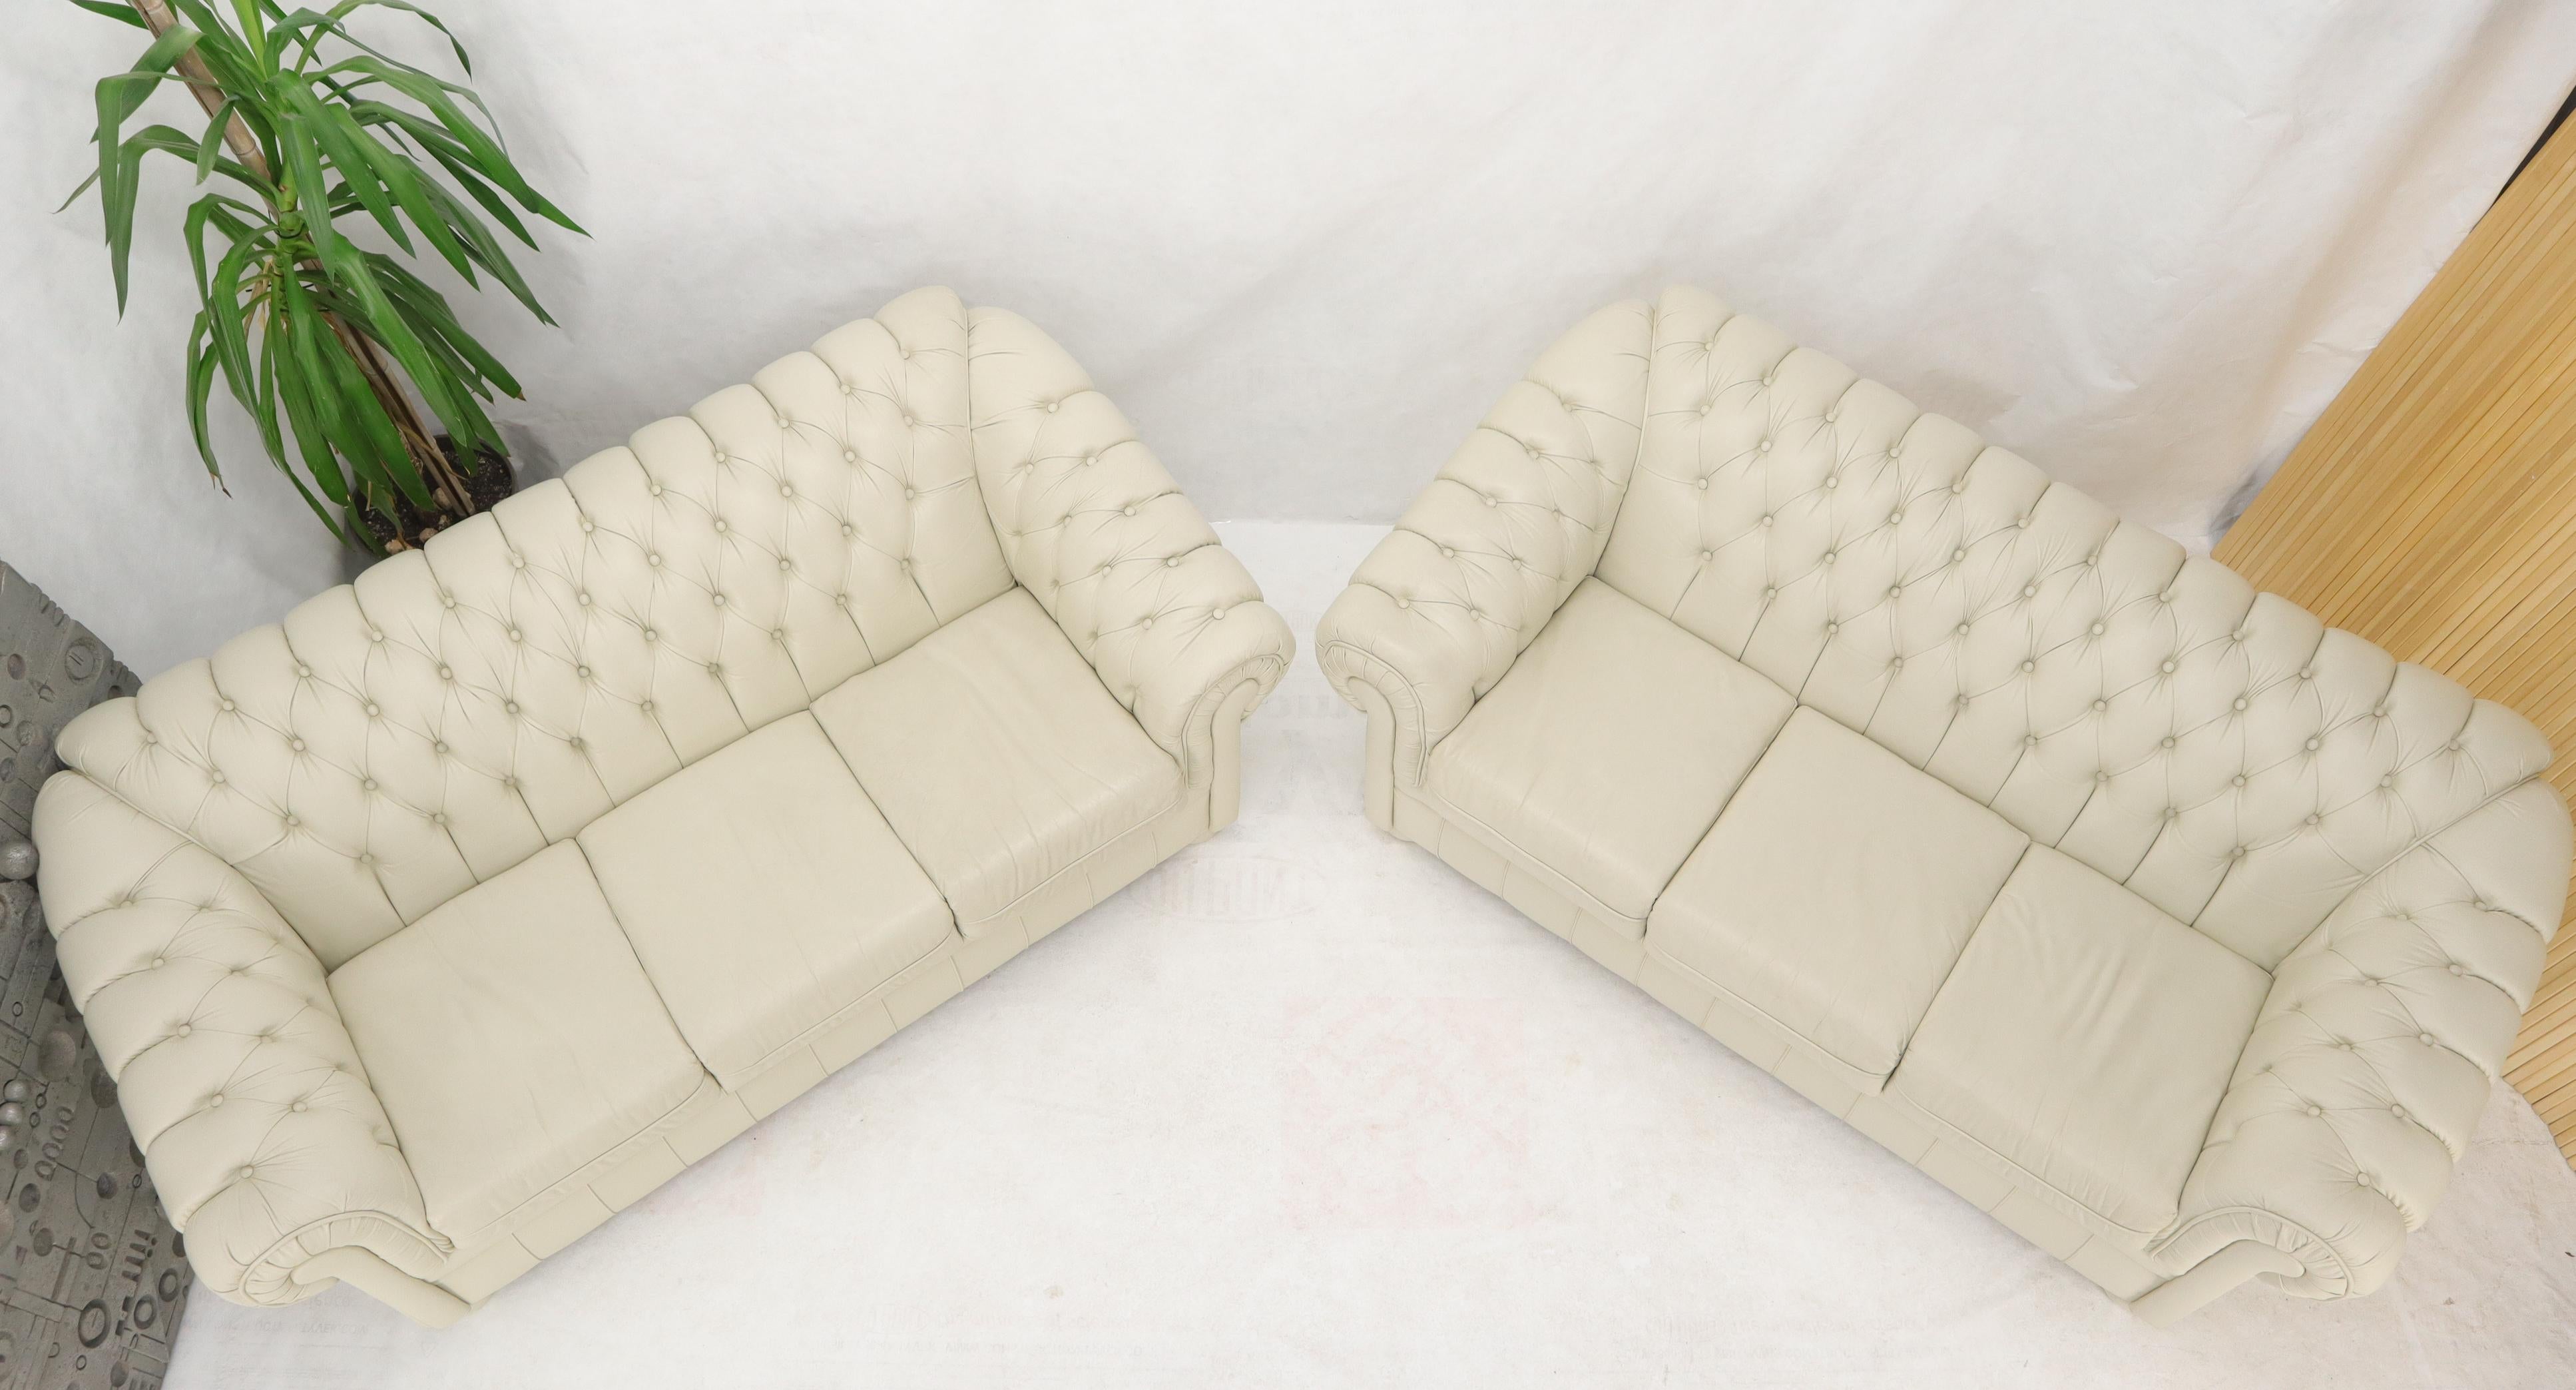 American Pair of Off-White Leather Upholstery Tufted Chesterfield Sofas Couches